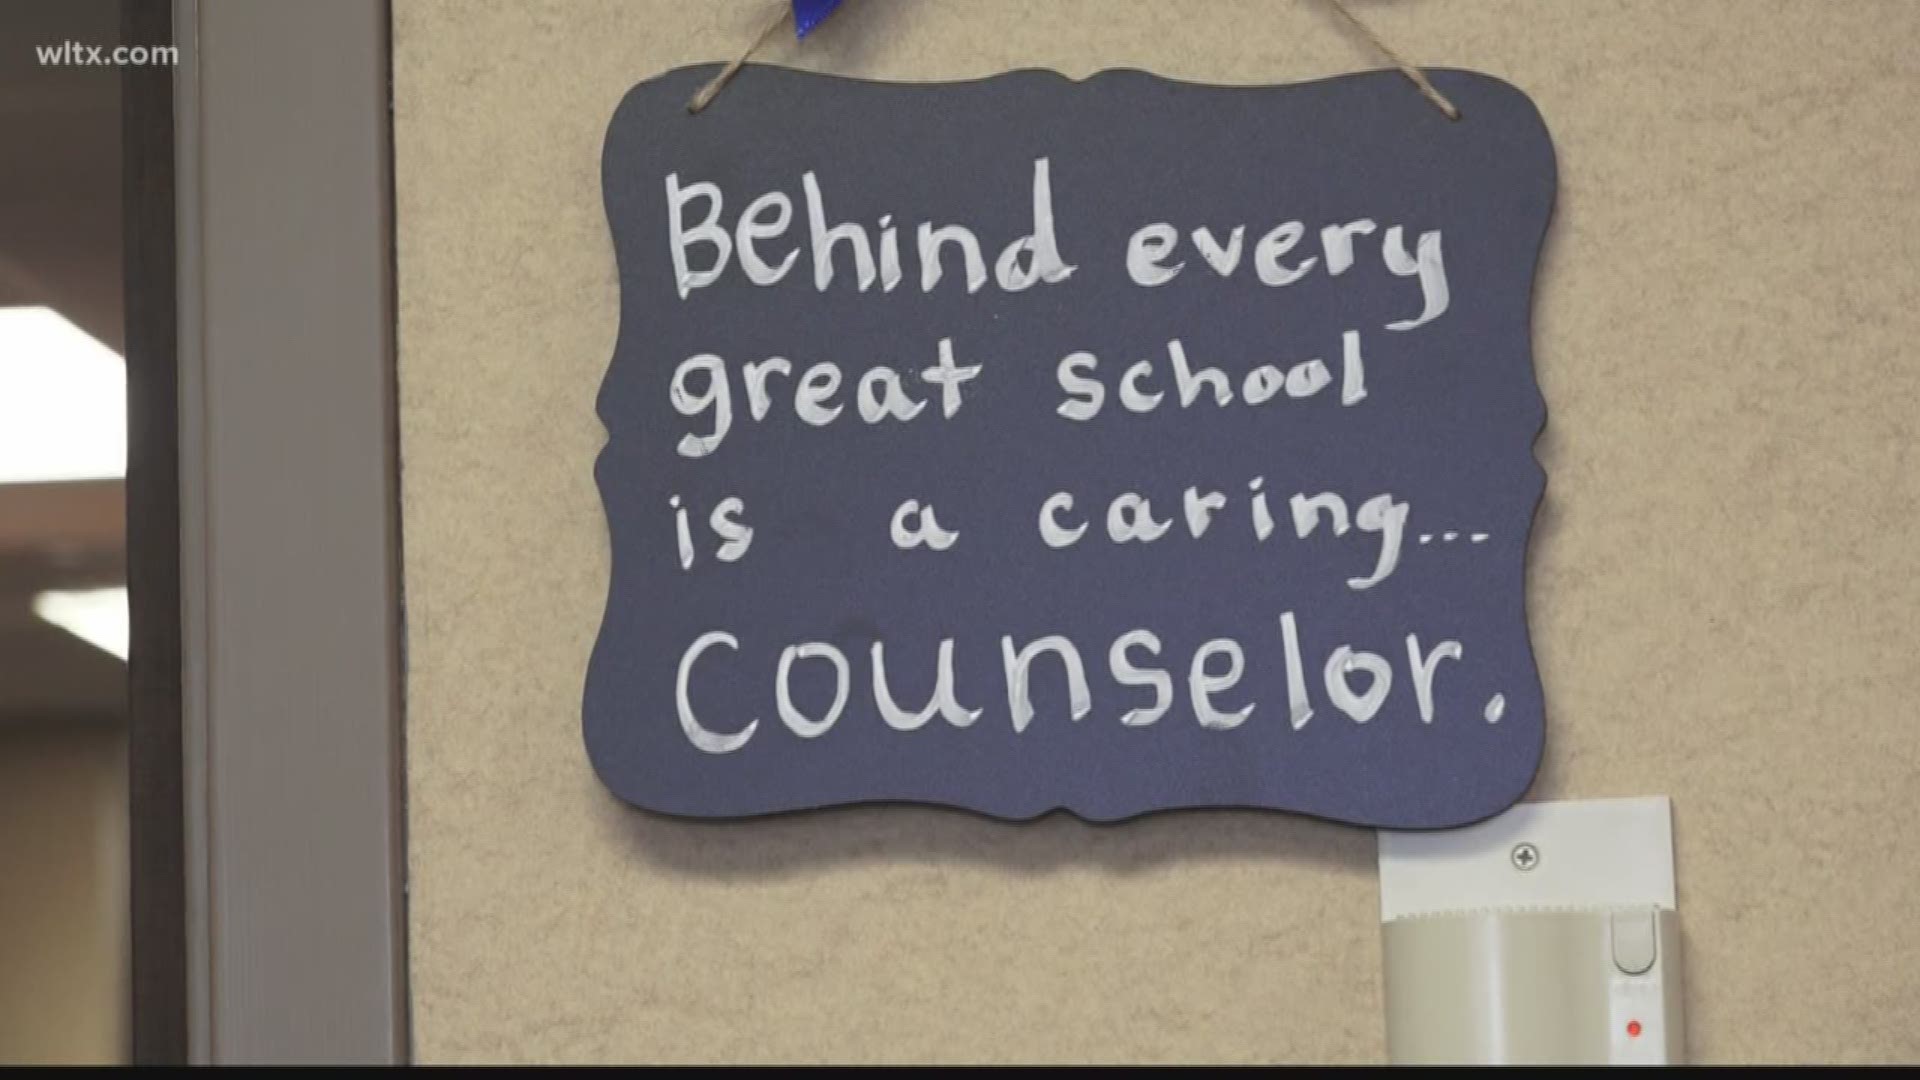 Here in South Carolina the president of the Palmetto State School Counselors Association says there isn't enough counselors at schools